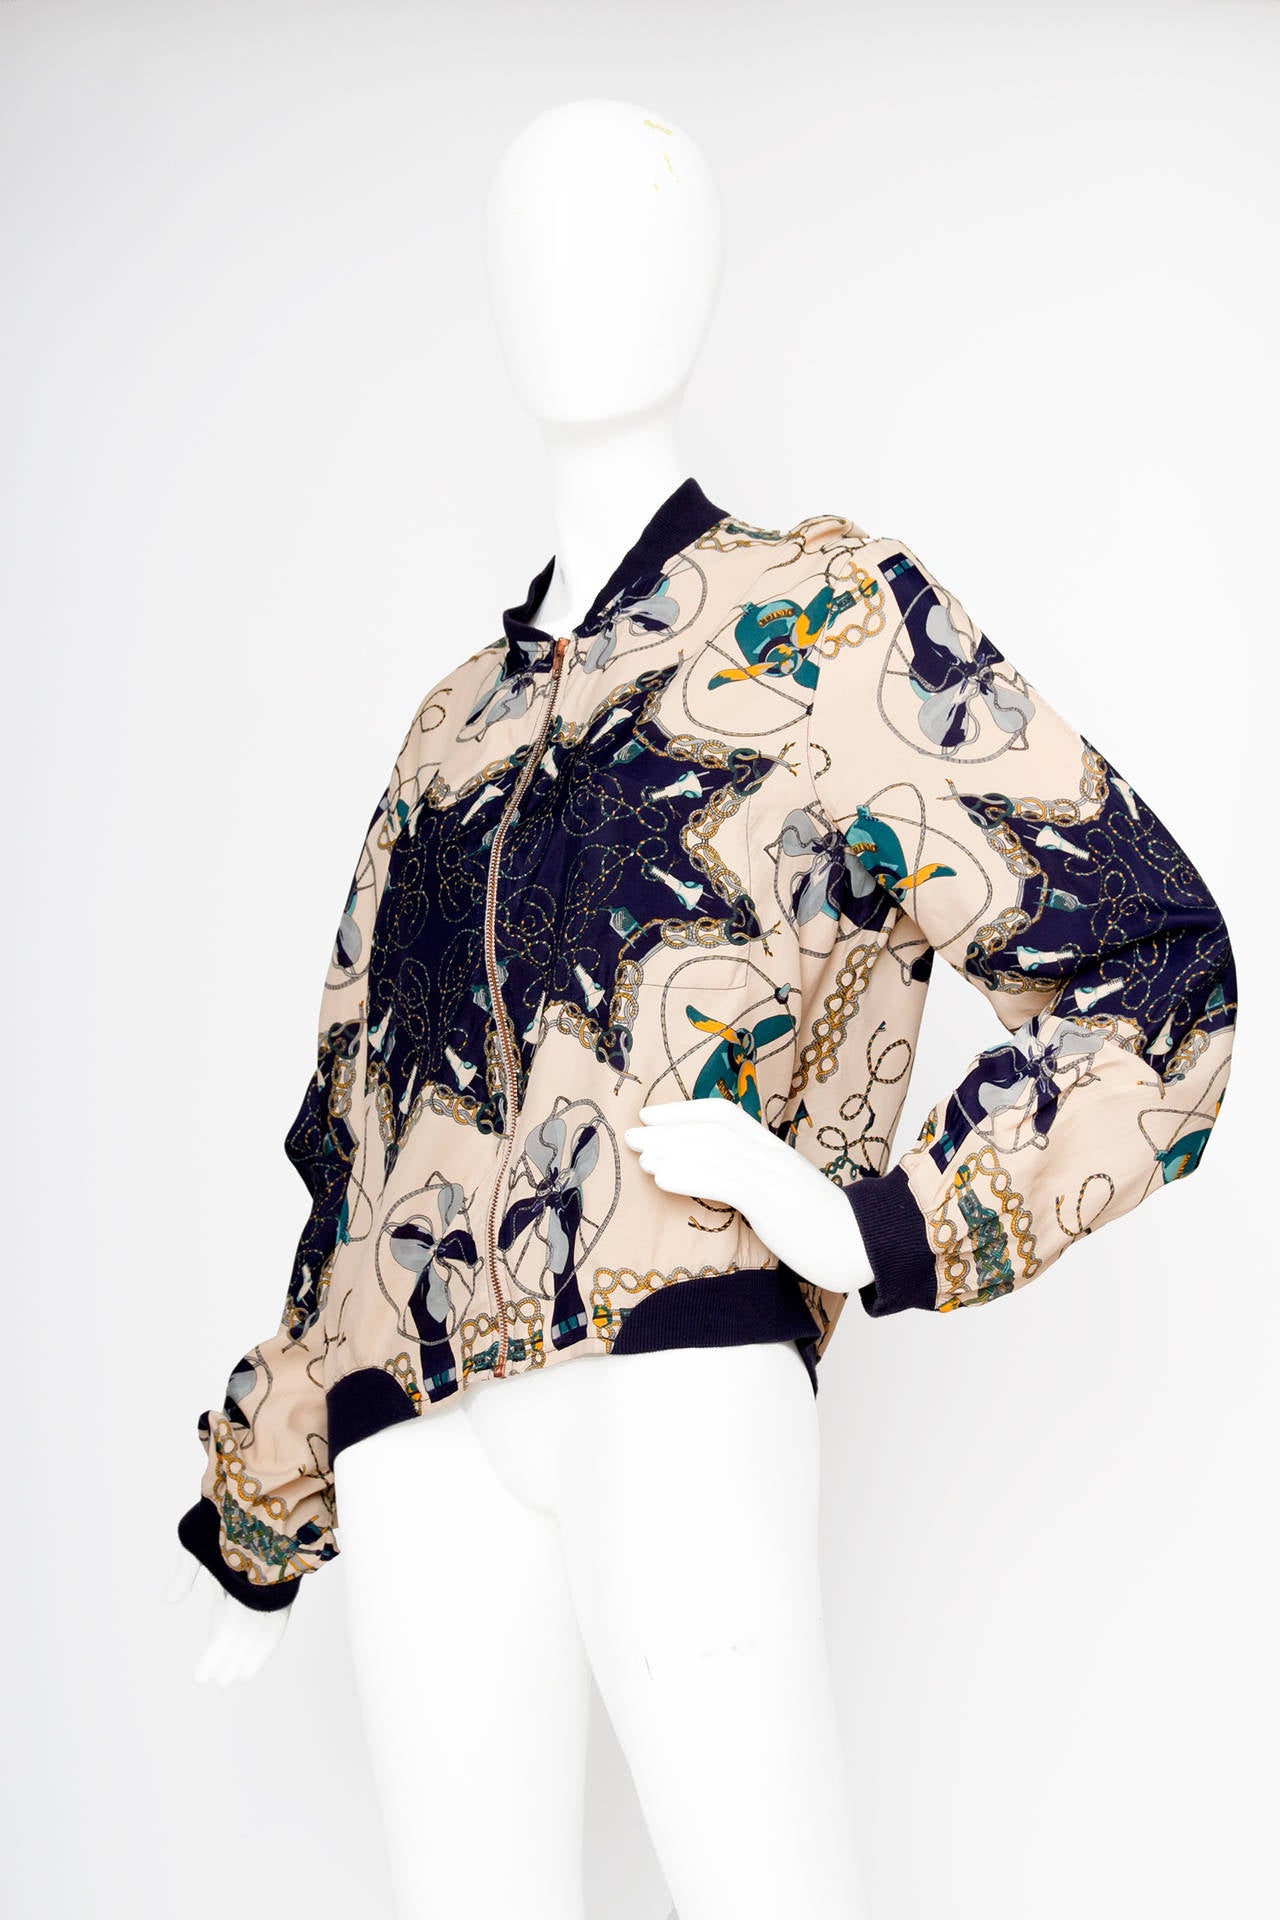 An amazing 1990s Jean Paul Gaultier silk bomber jacket with an electrical appliance themed print. The jacket is held in a beige and navy colourscheme with green and yellow accent colours. The bomber closes in the front with a metal zipper closure